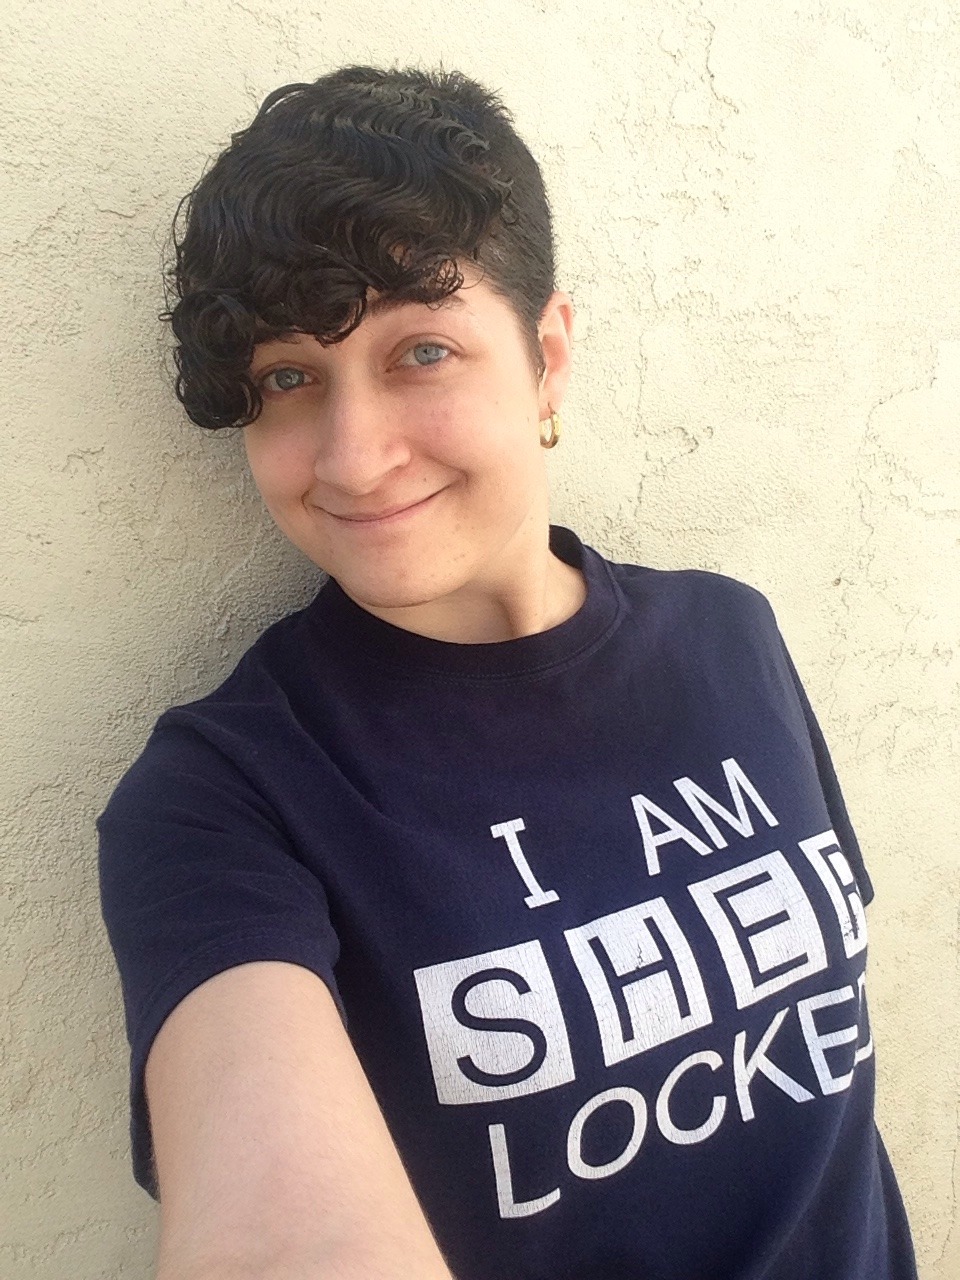 Hi there! Itâ€™s your (conceited) admin. I wore this shirt and took this selfie